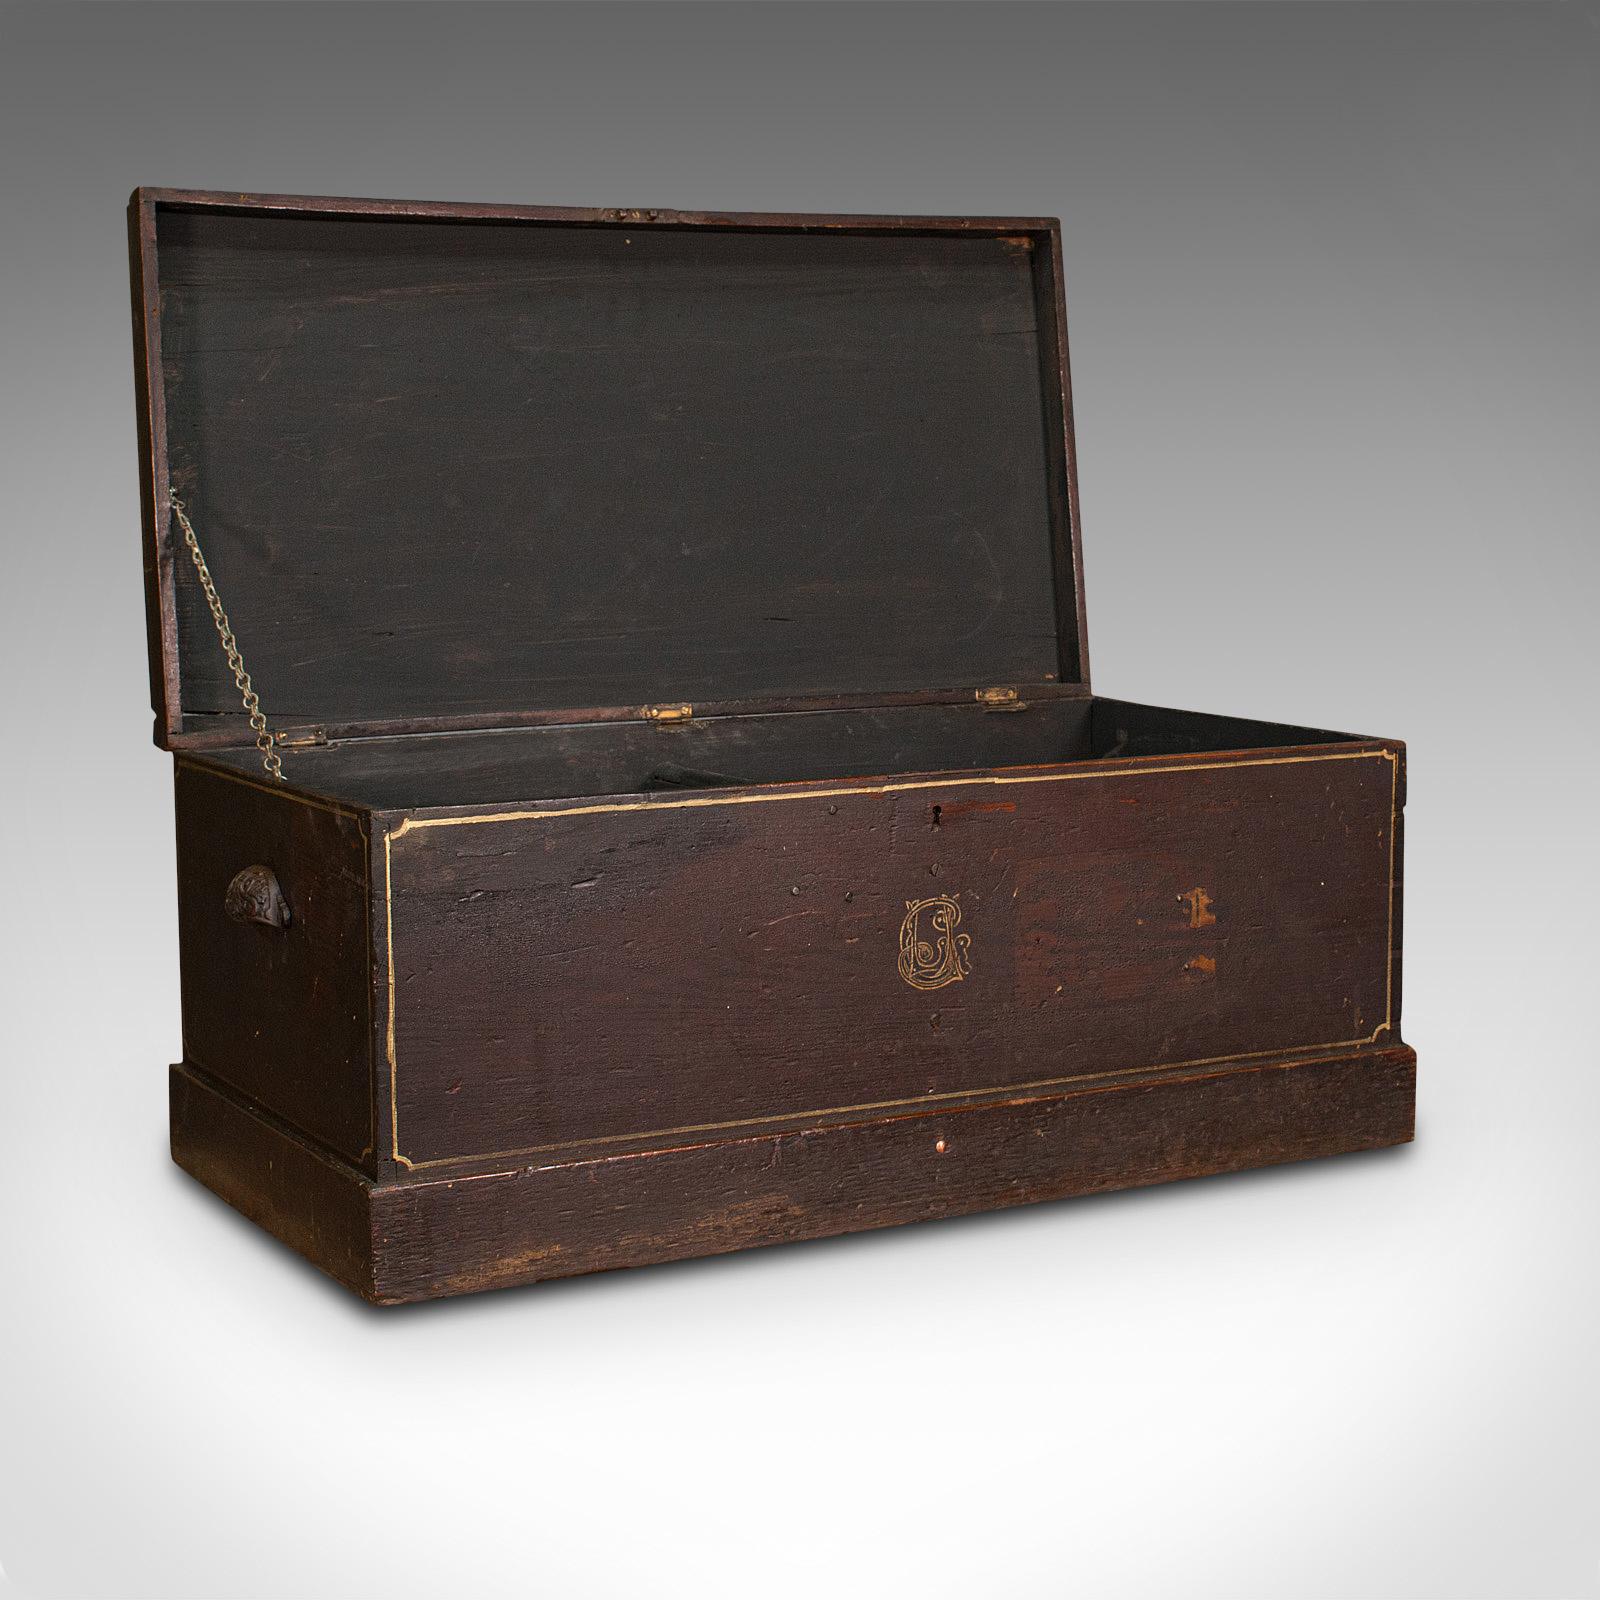 This is an antique merchant's tool chest. An English, stained pine craftsman's trunk, dating to the late Victorian period, circa 1900.

Pleasingly robust with charming personalised detail
Displays a desirable aged patina and signs of industrial